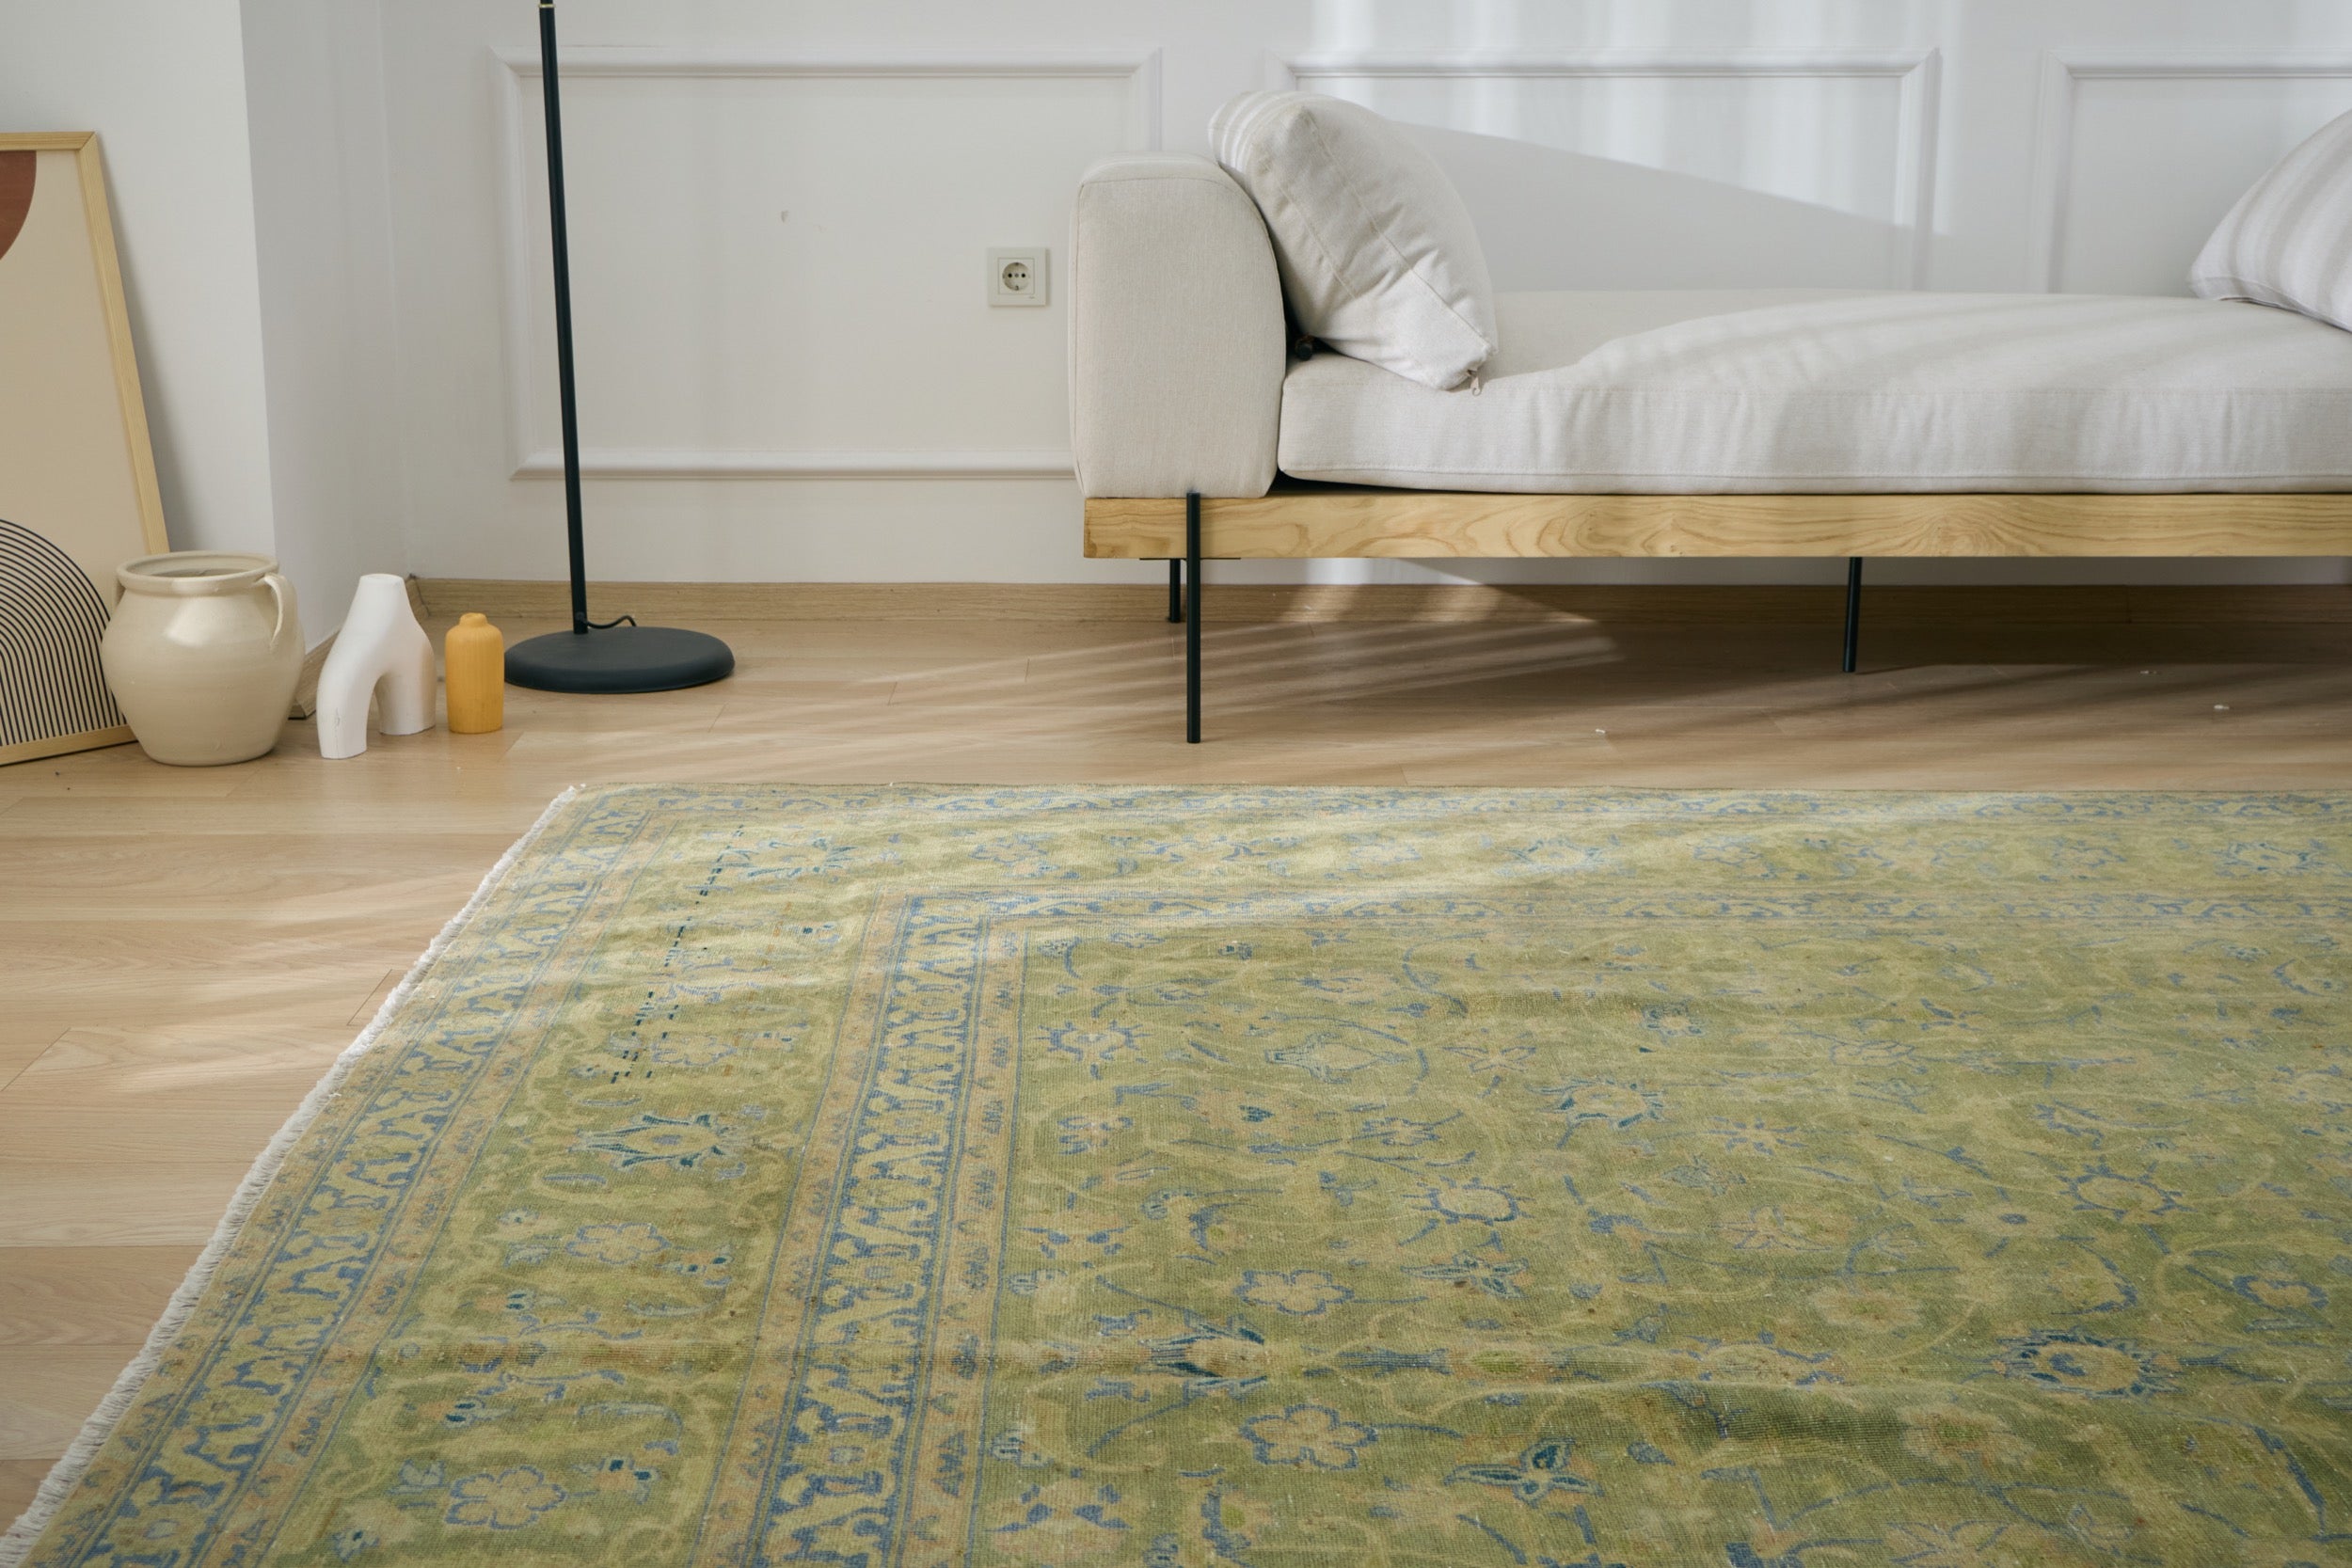 Yenta - Timeless Area Rug Sophistication | Kuden RugsYenta - Persian Heritage in Your Home | Kuden Rugs